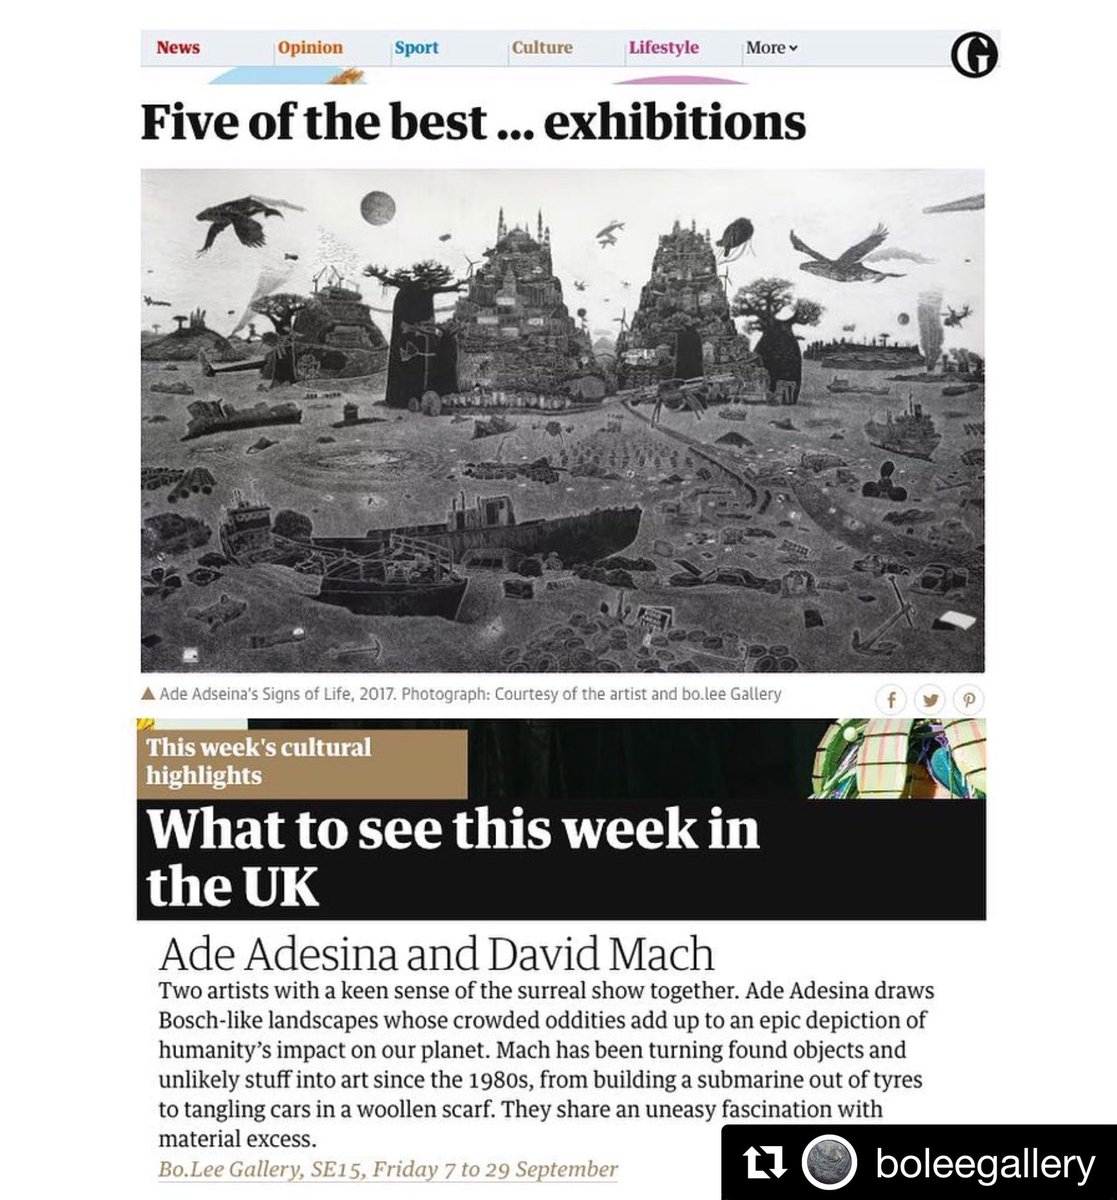 Brilliant to see #SignsofLife my exhibition with @adeadesina made it to the top 5 UK exhibitions in this weeks @guardian Looking forward to the PV this evening 6-8 #theguardian #davidmach #adeadesina #jammgallery #contemporaryprintmaking #contemporarycollage #boleegallery